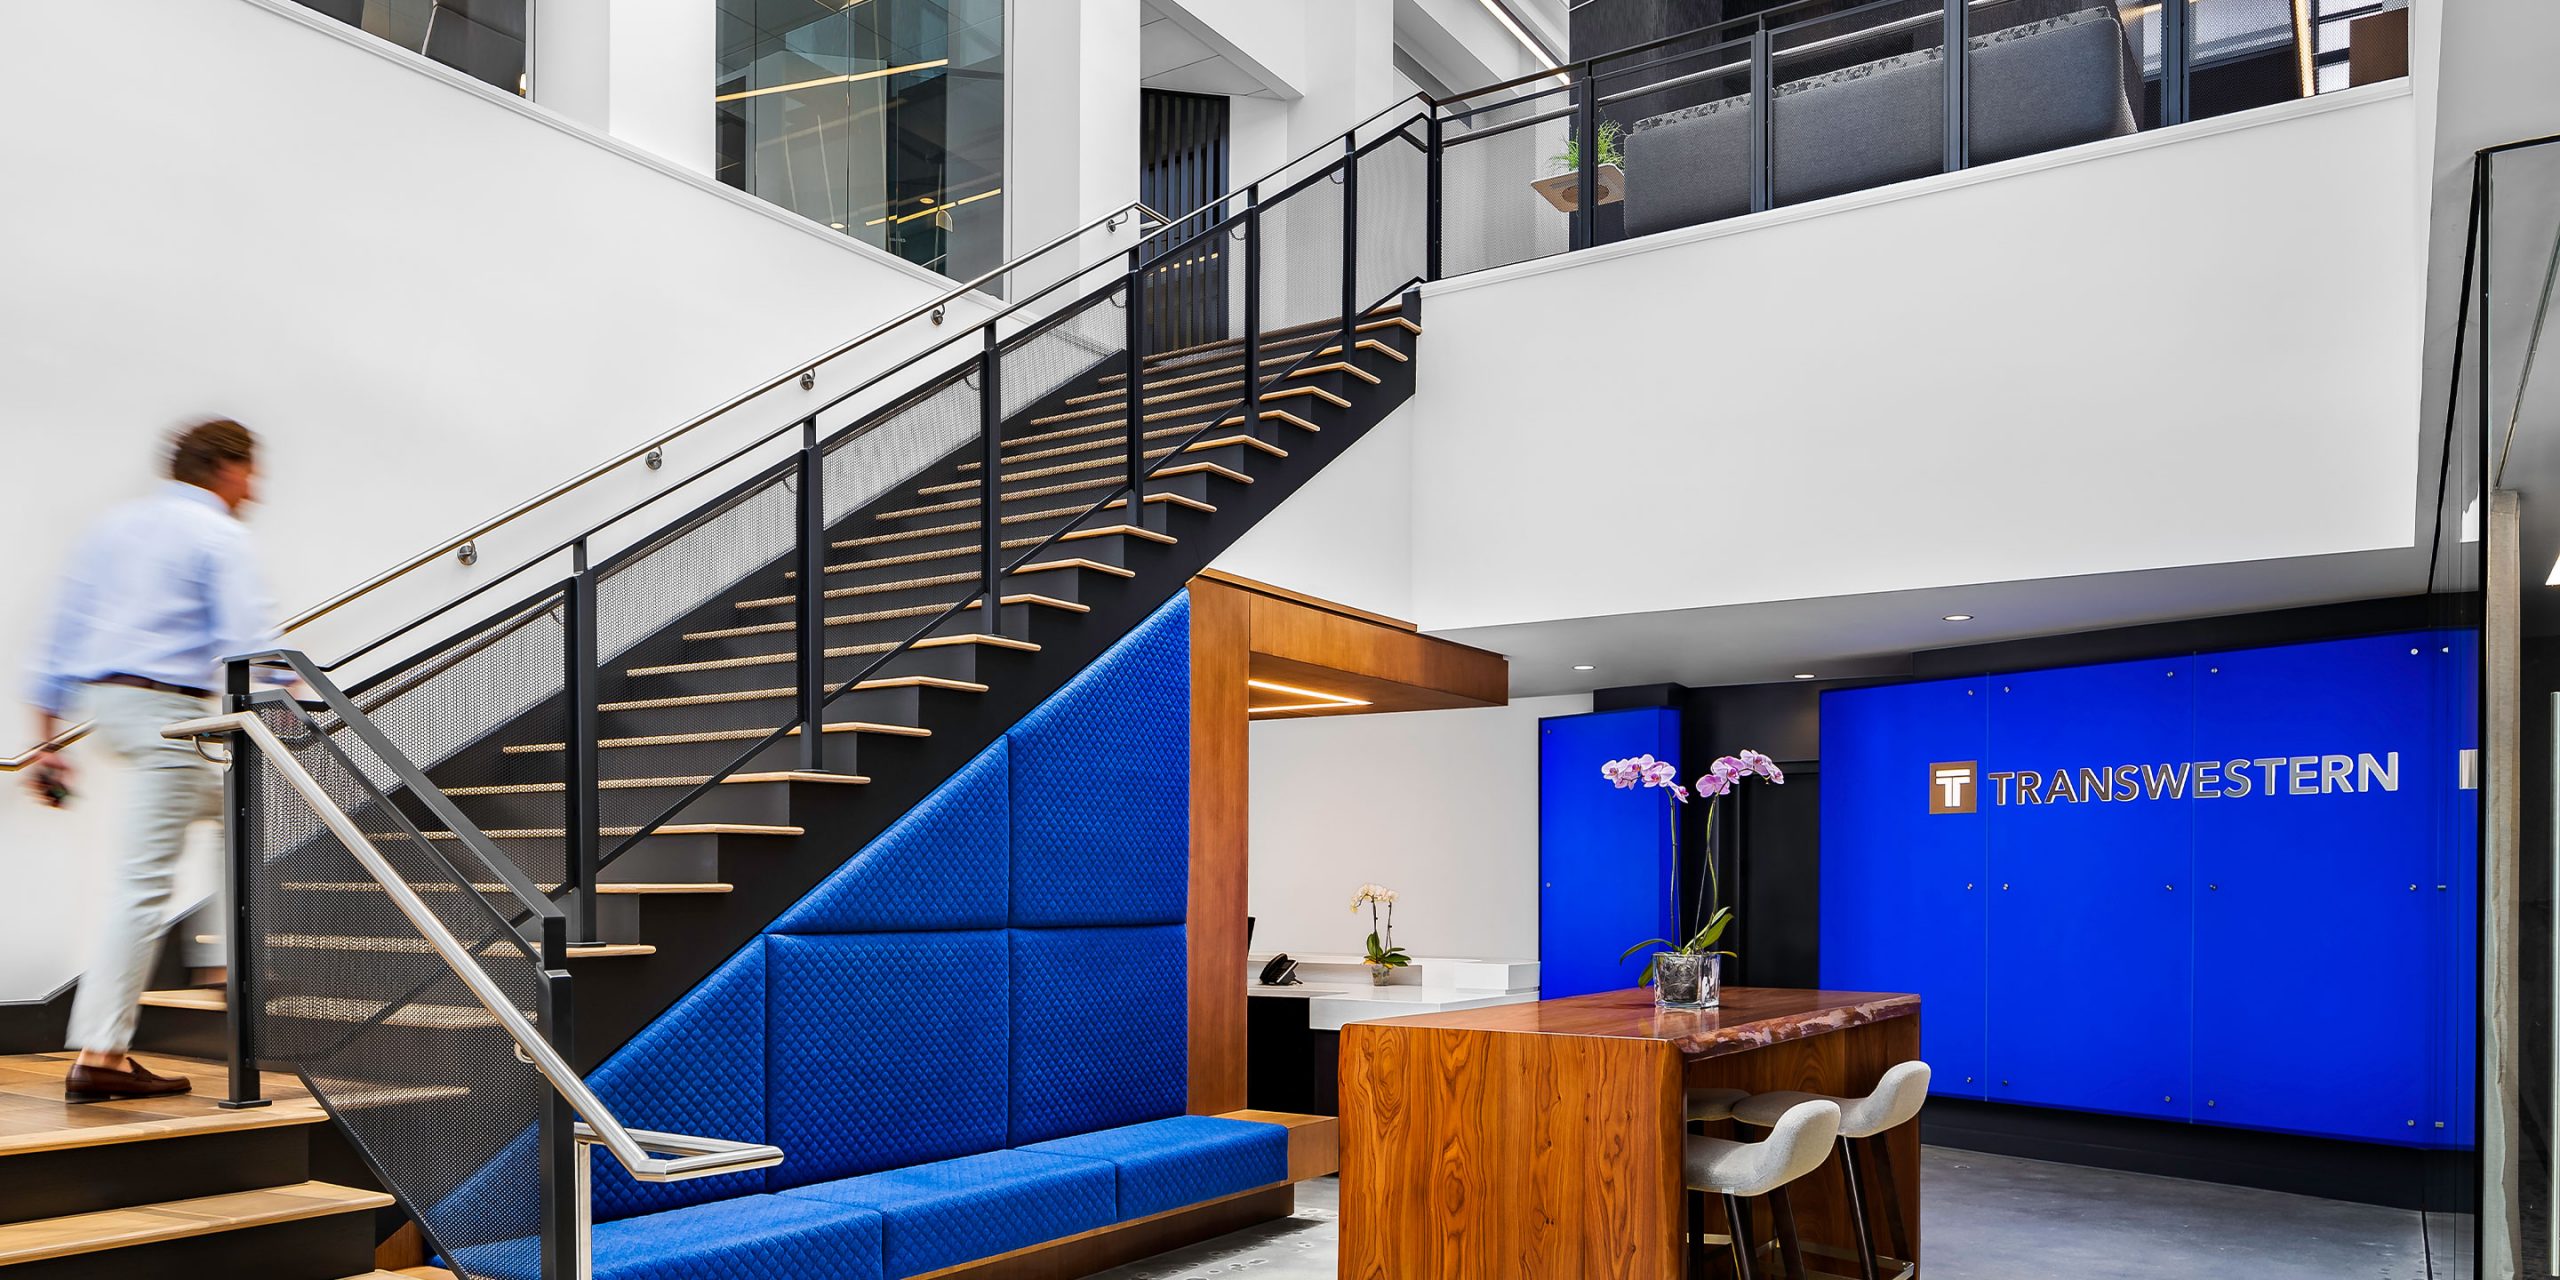 Office Workplace Lobby Design in an Atrium